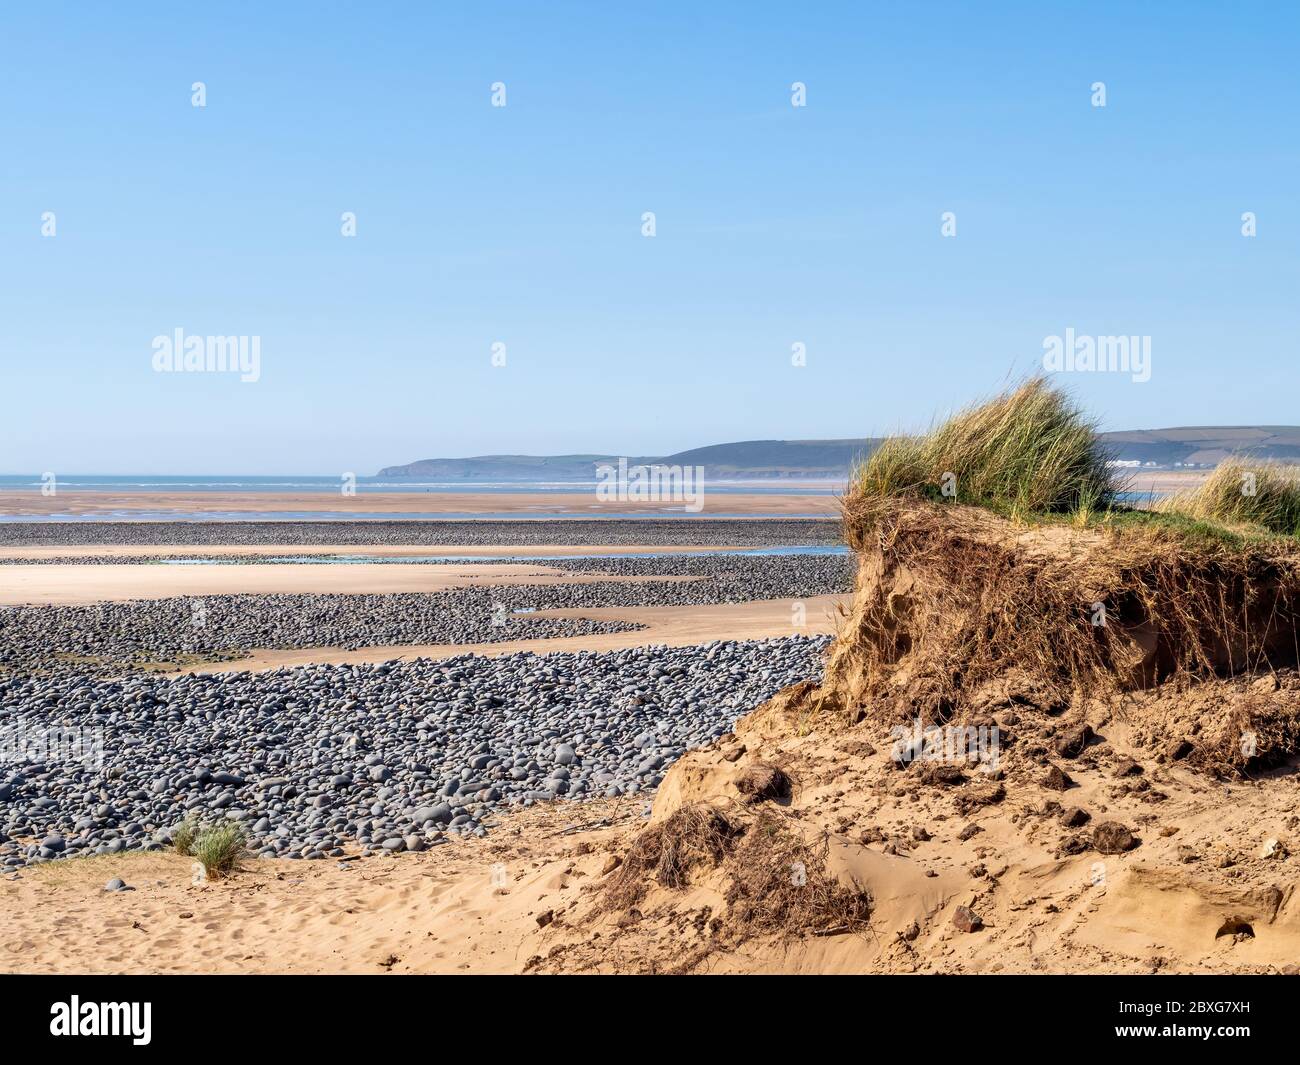 View of Northam Burrows on the Torridge and Taw estuary. Visible sand dunes and pebbles on sandy beach. Tide out. Dramatic landscape. Stock Photo